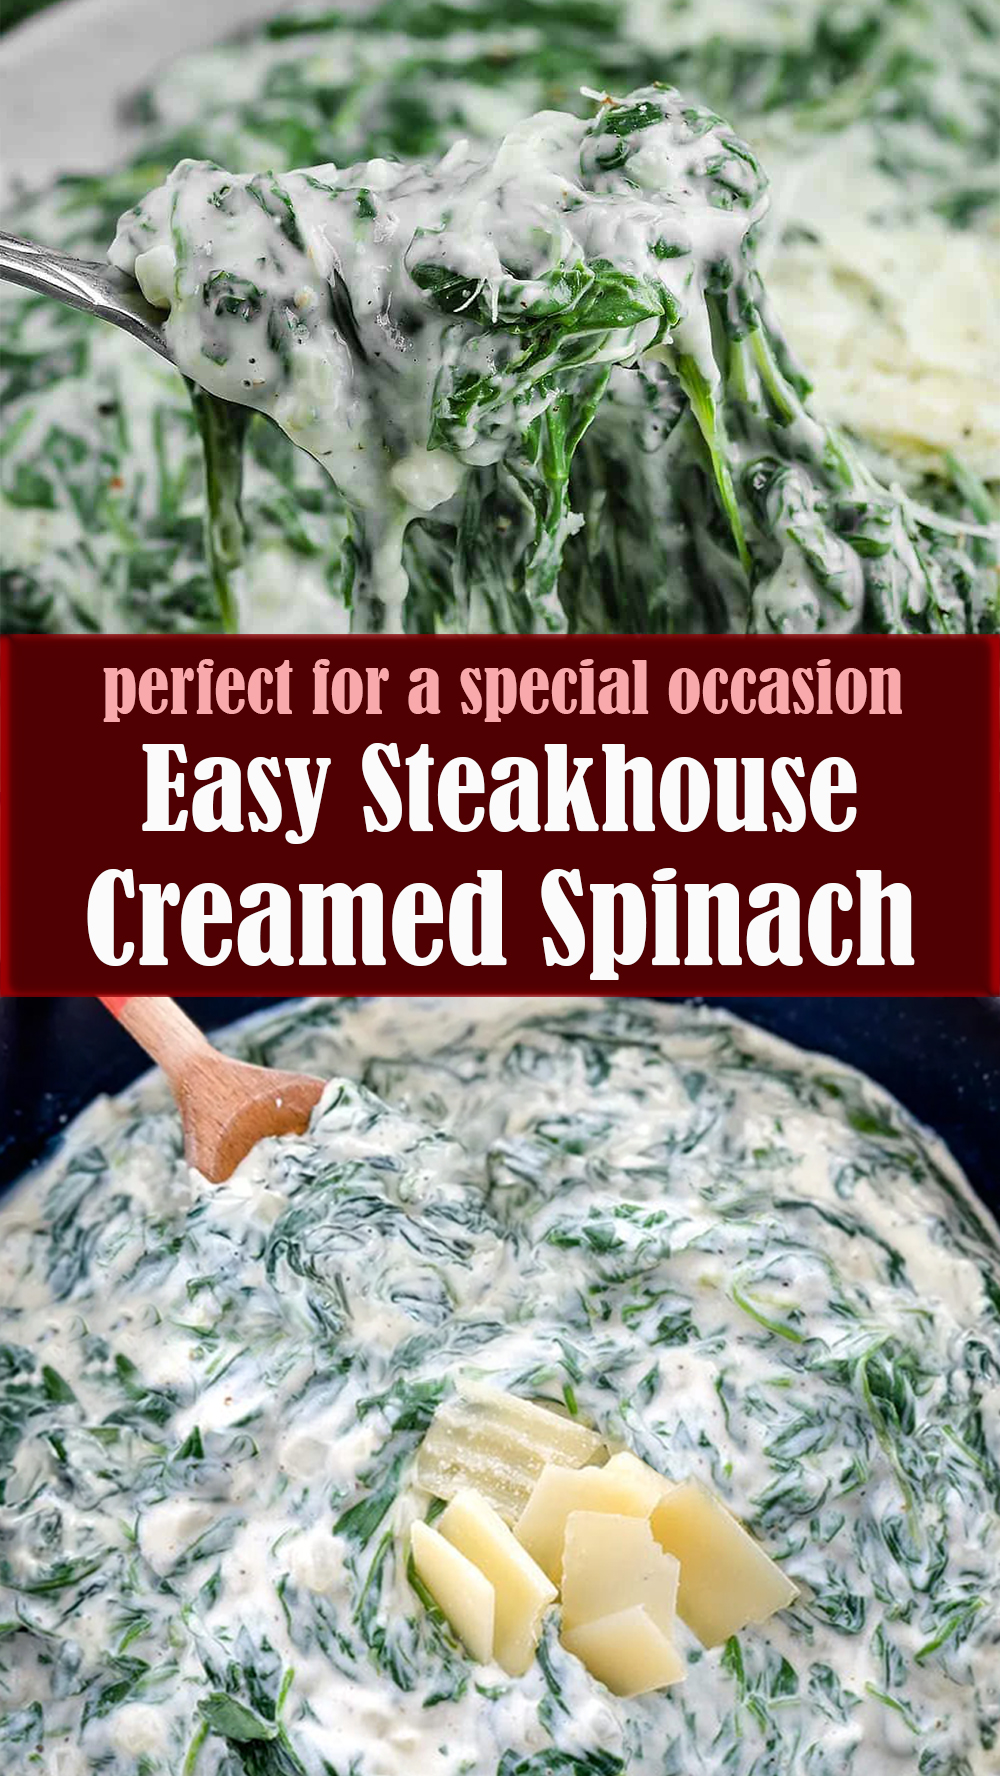 Easy Steakhouse Creamed Spinach